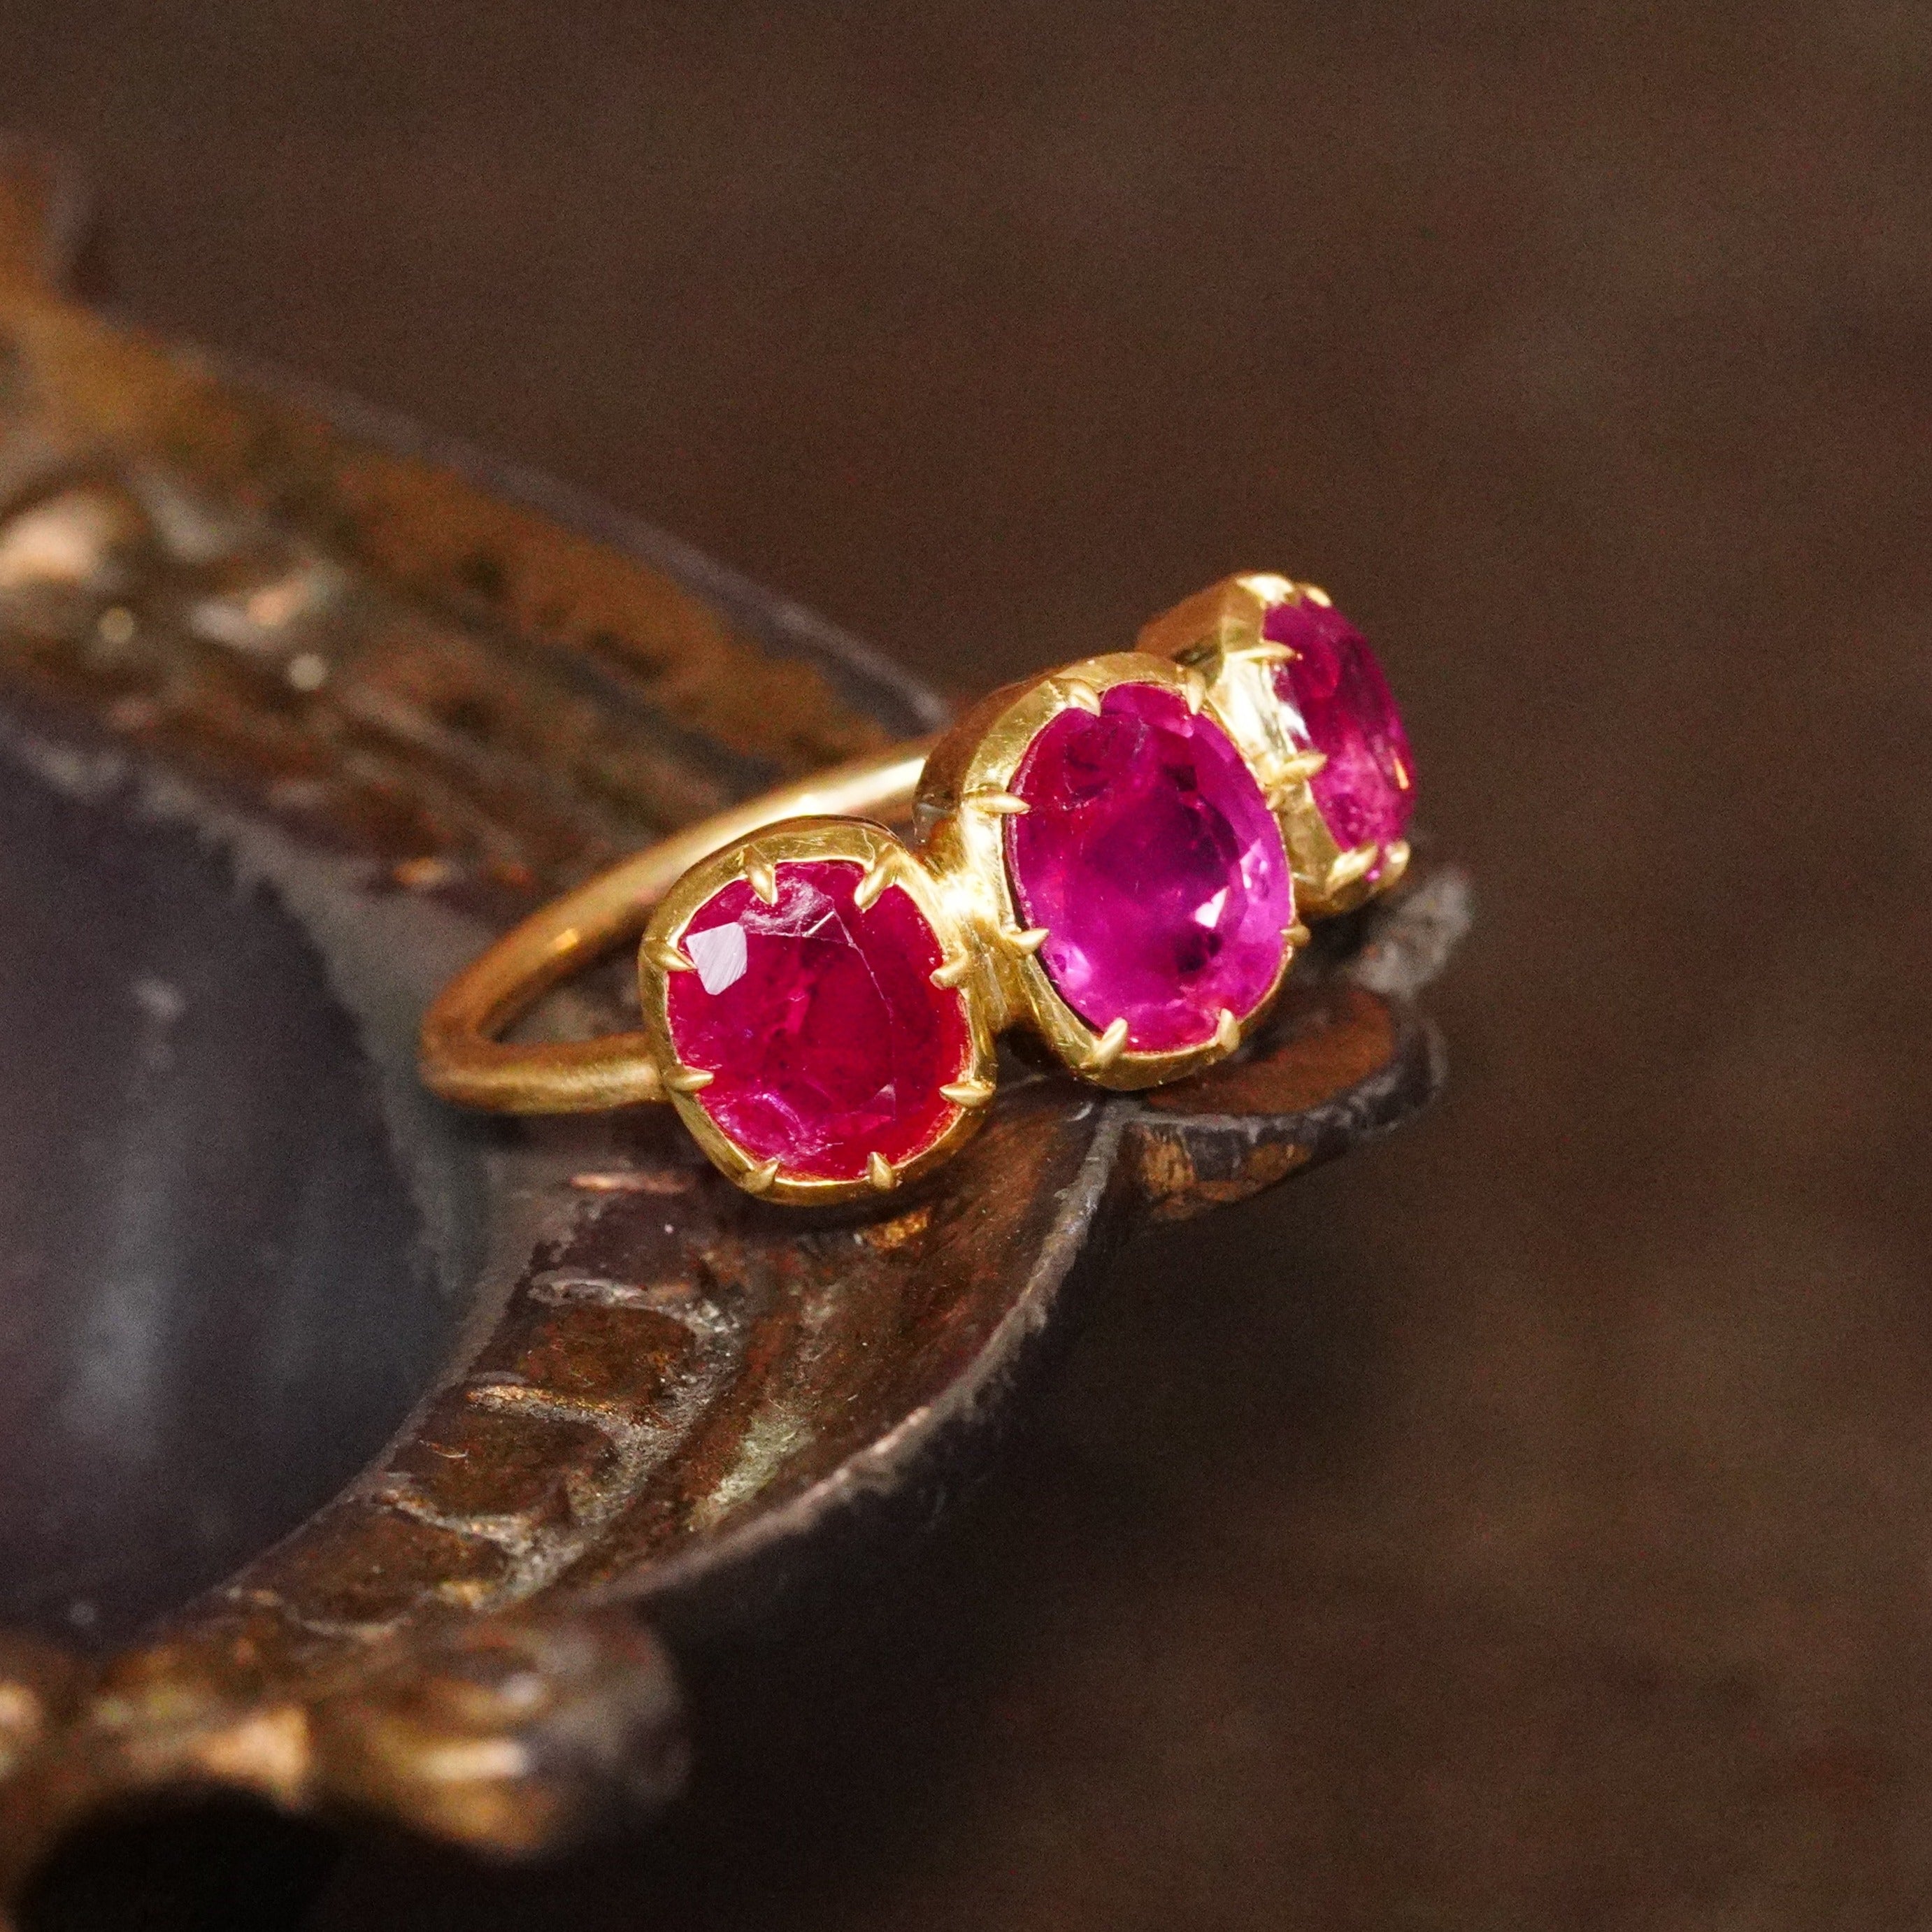 18K Gold Victorian Style Sapphire Ring by Jogani